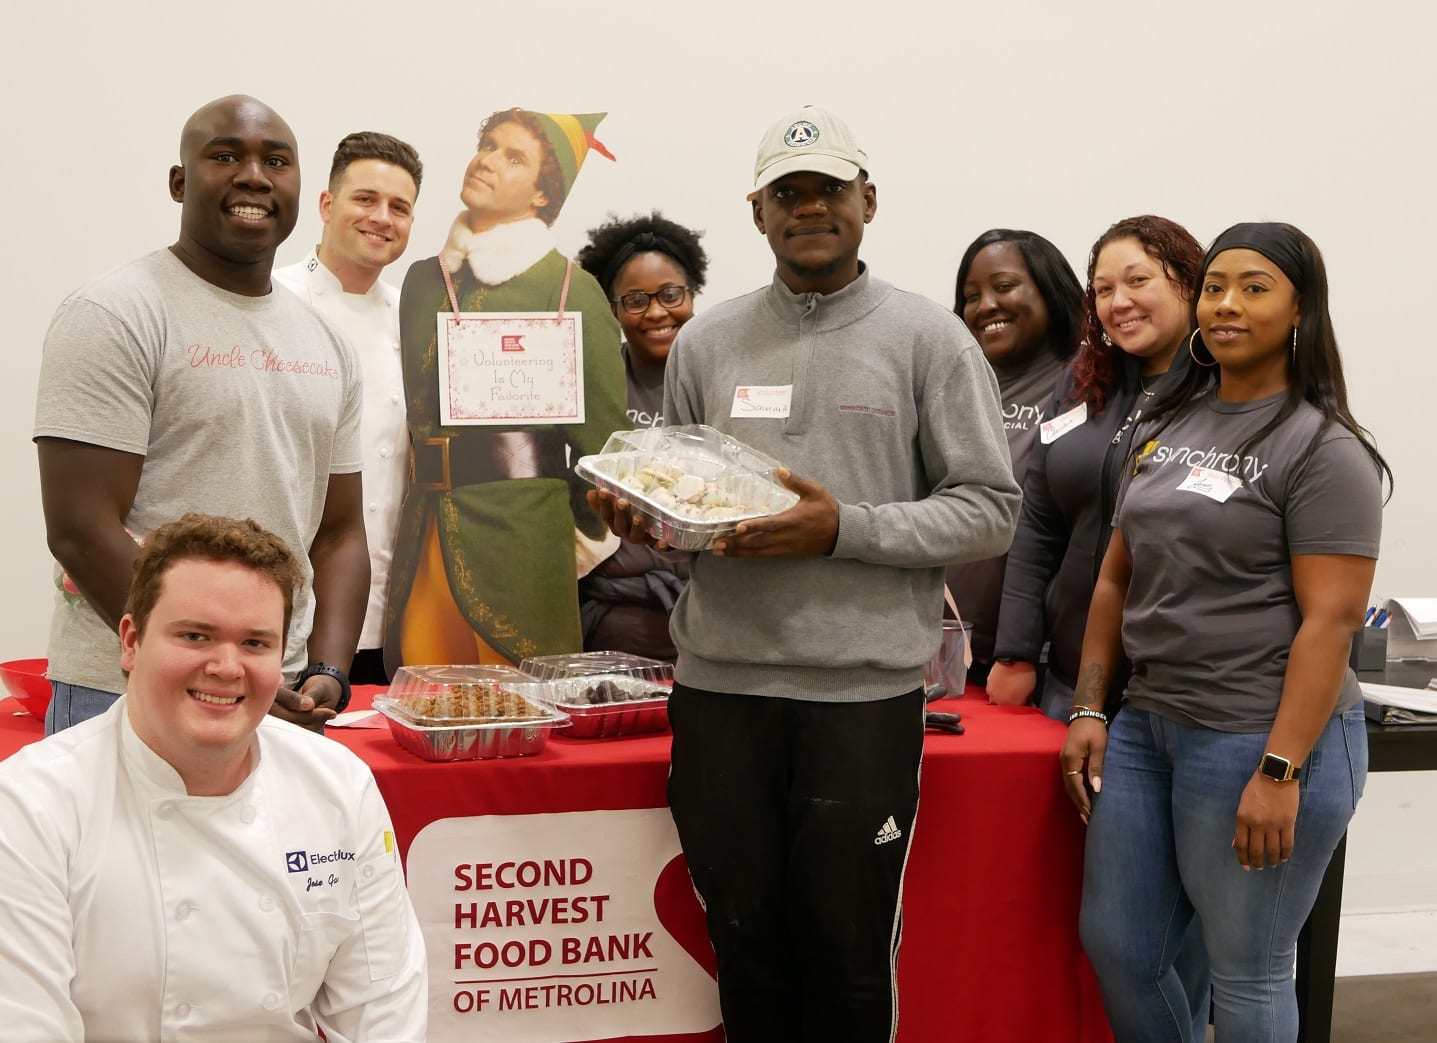 'Uncle Cheesecake' bakes with Electrolux, delivers holiday favorites to area non-profits